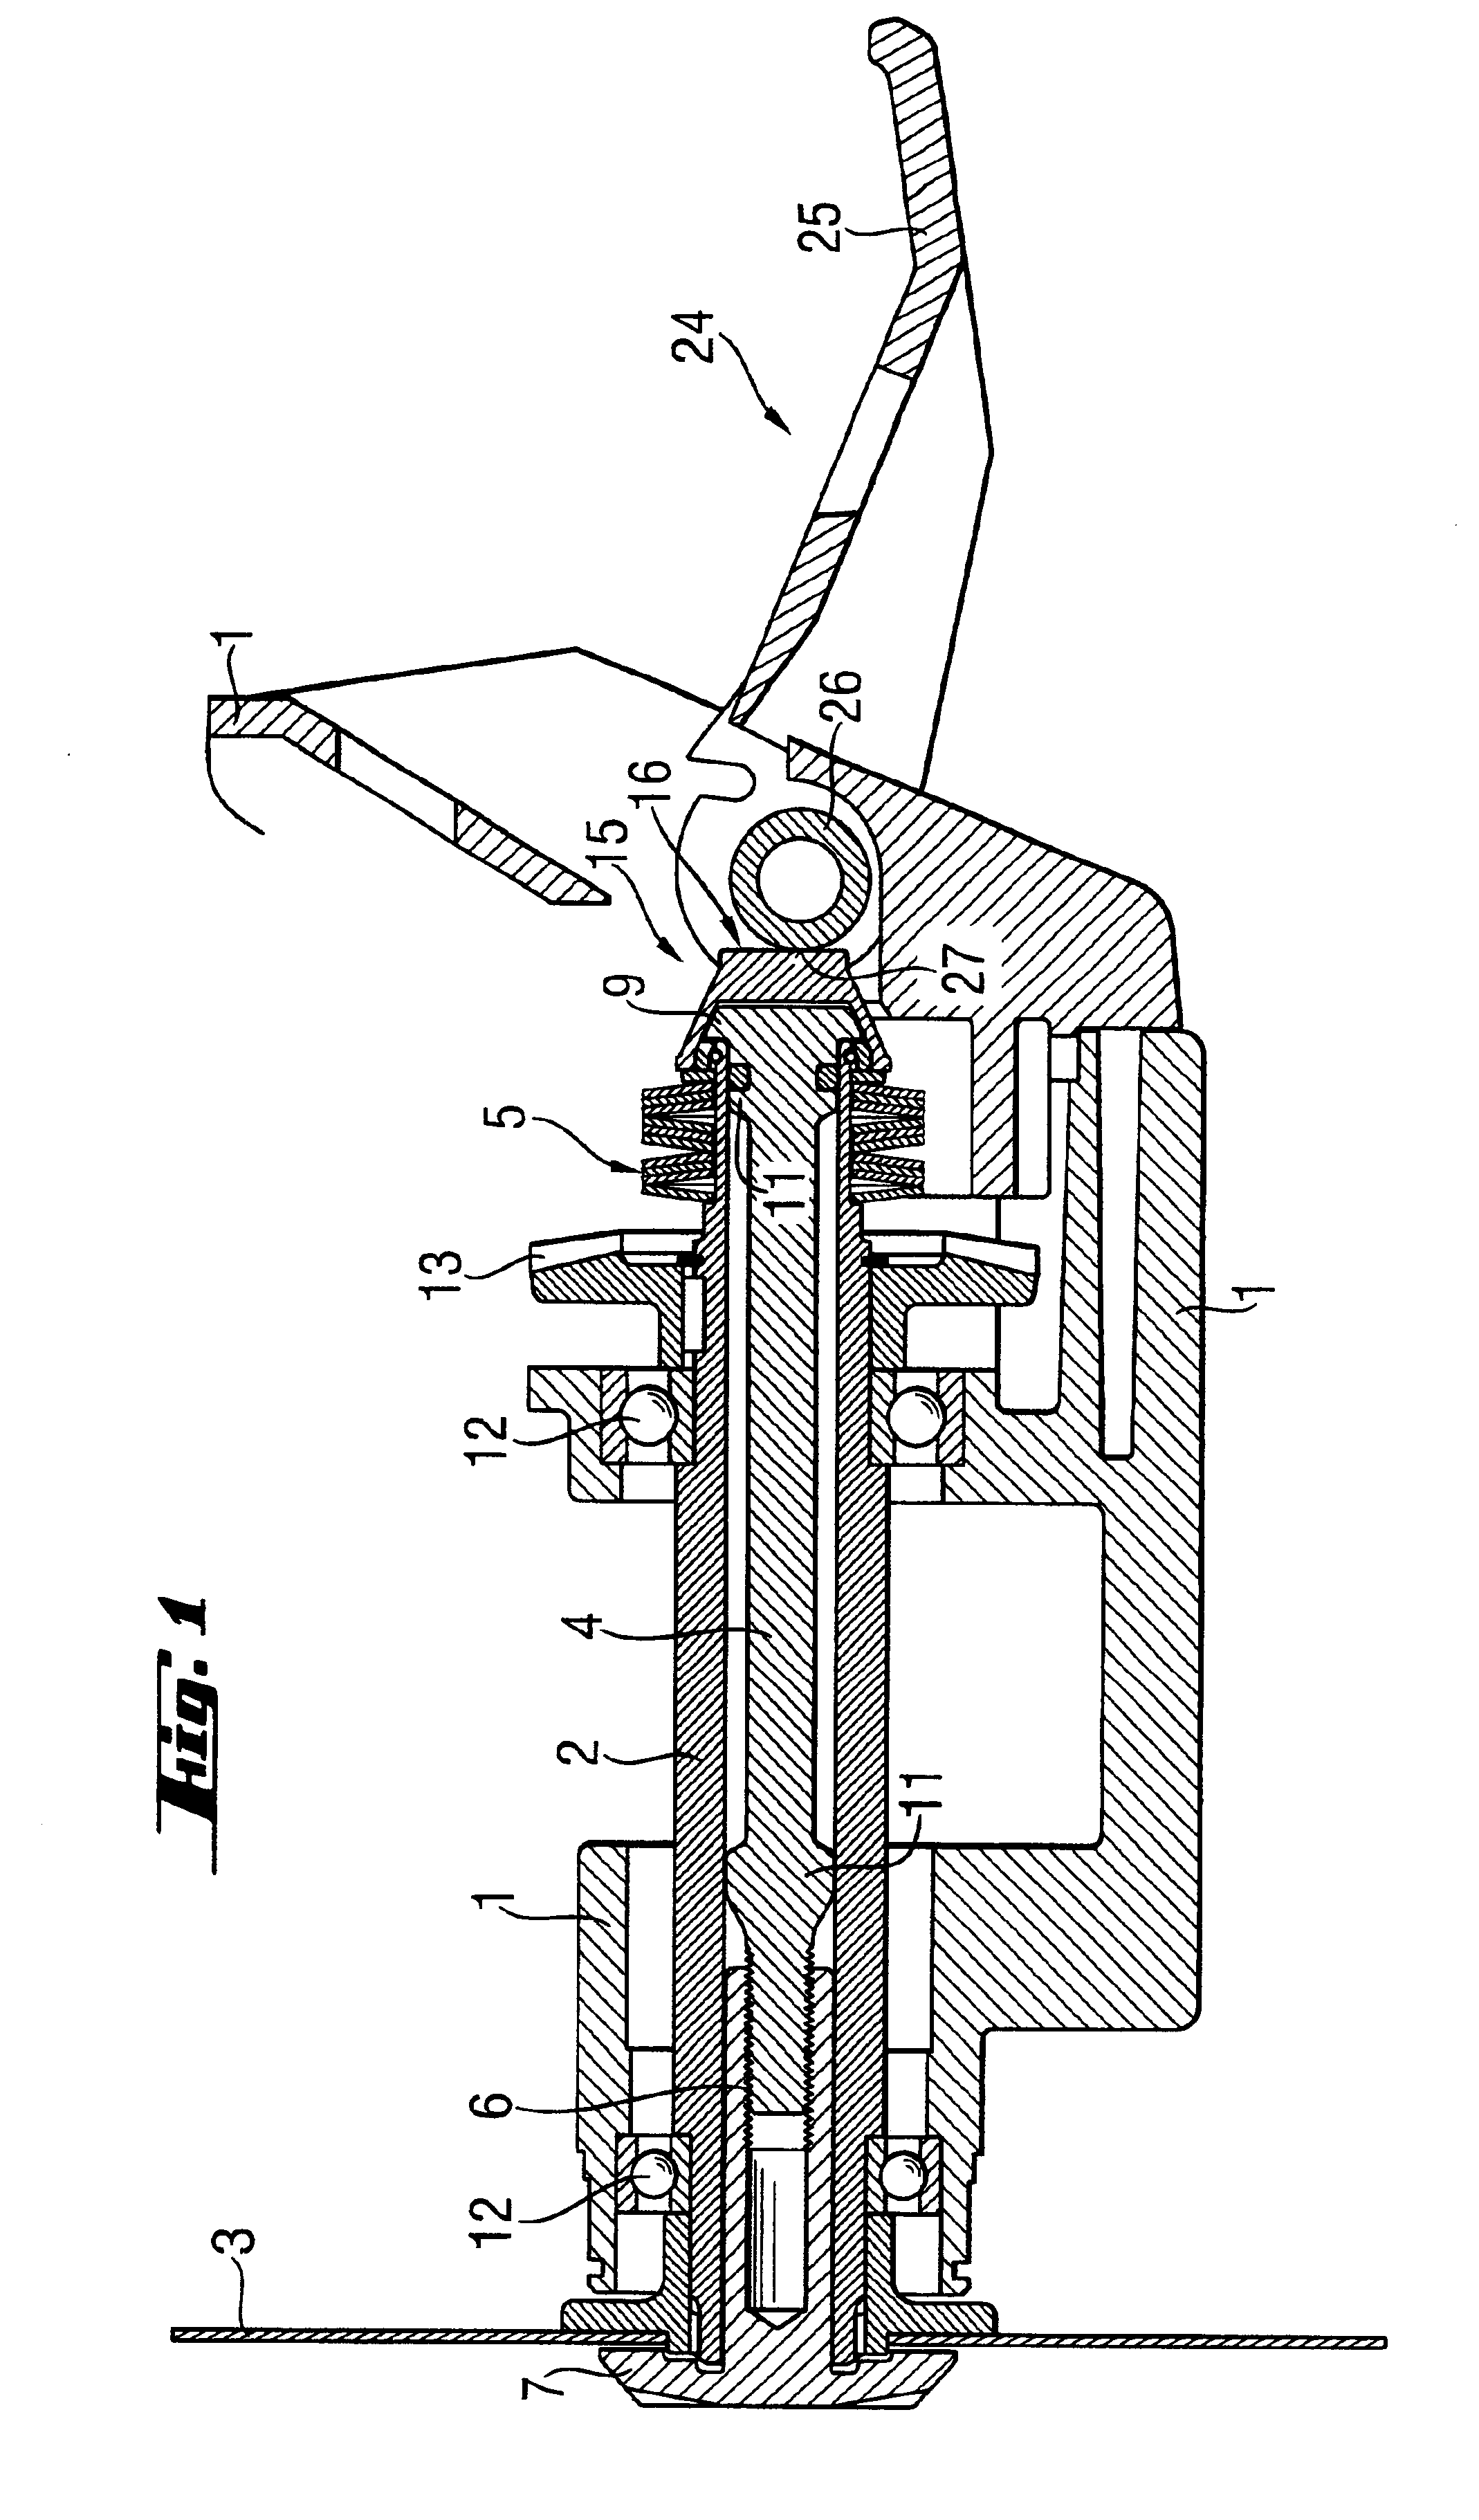 Electrical tool with a quick-action clamping device